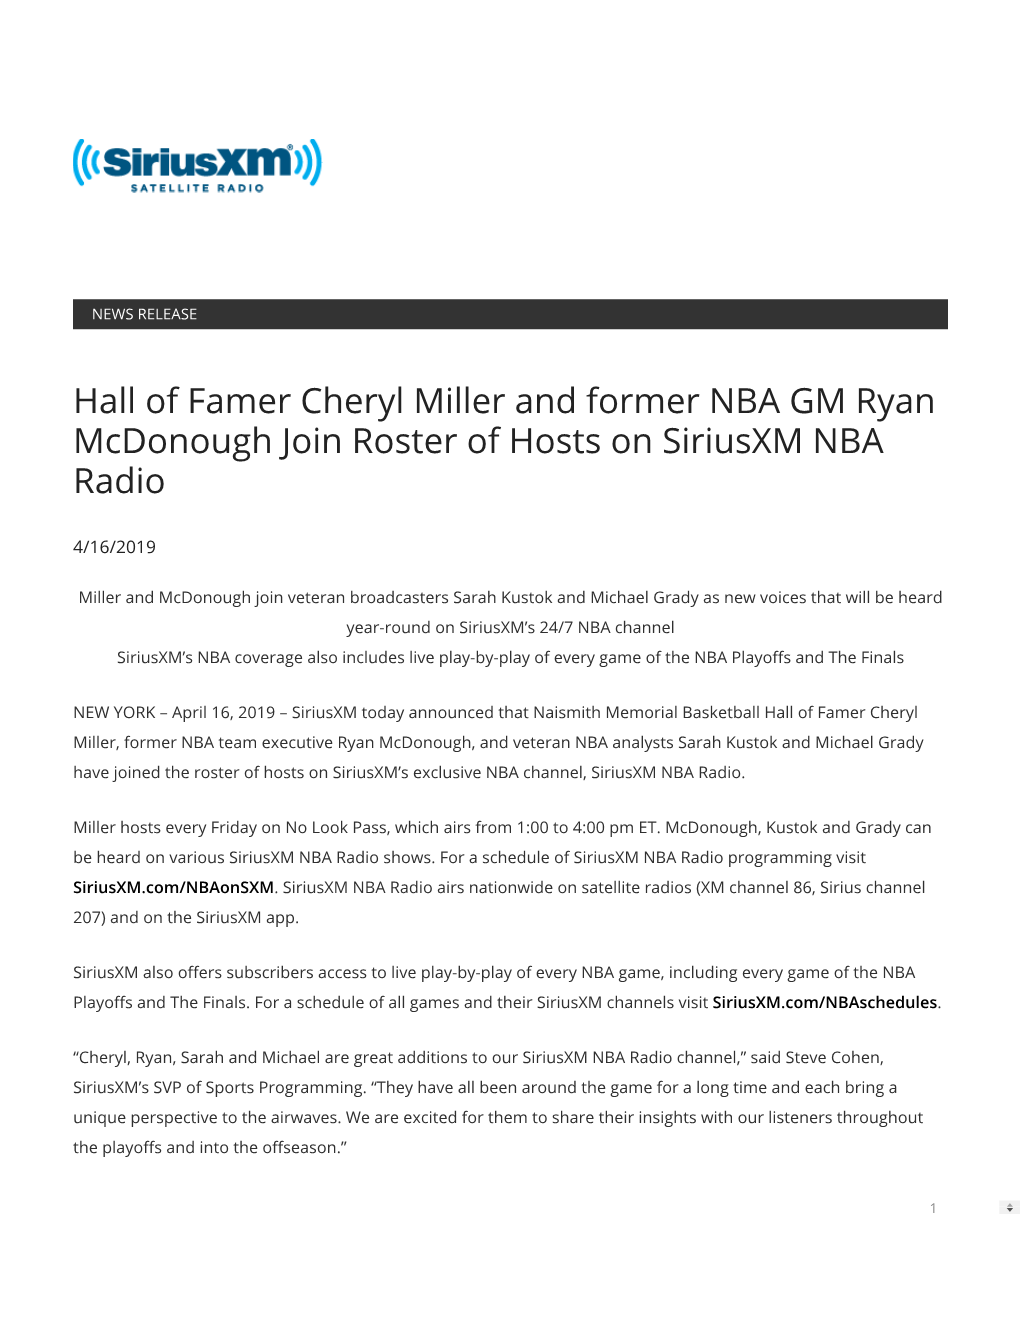 Hall of Famer Cheryl Miller and Former NBA GM Ryan Mcdonough Join Roster of Hosts on Siriusxm NBA Radio